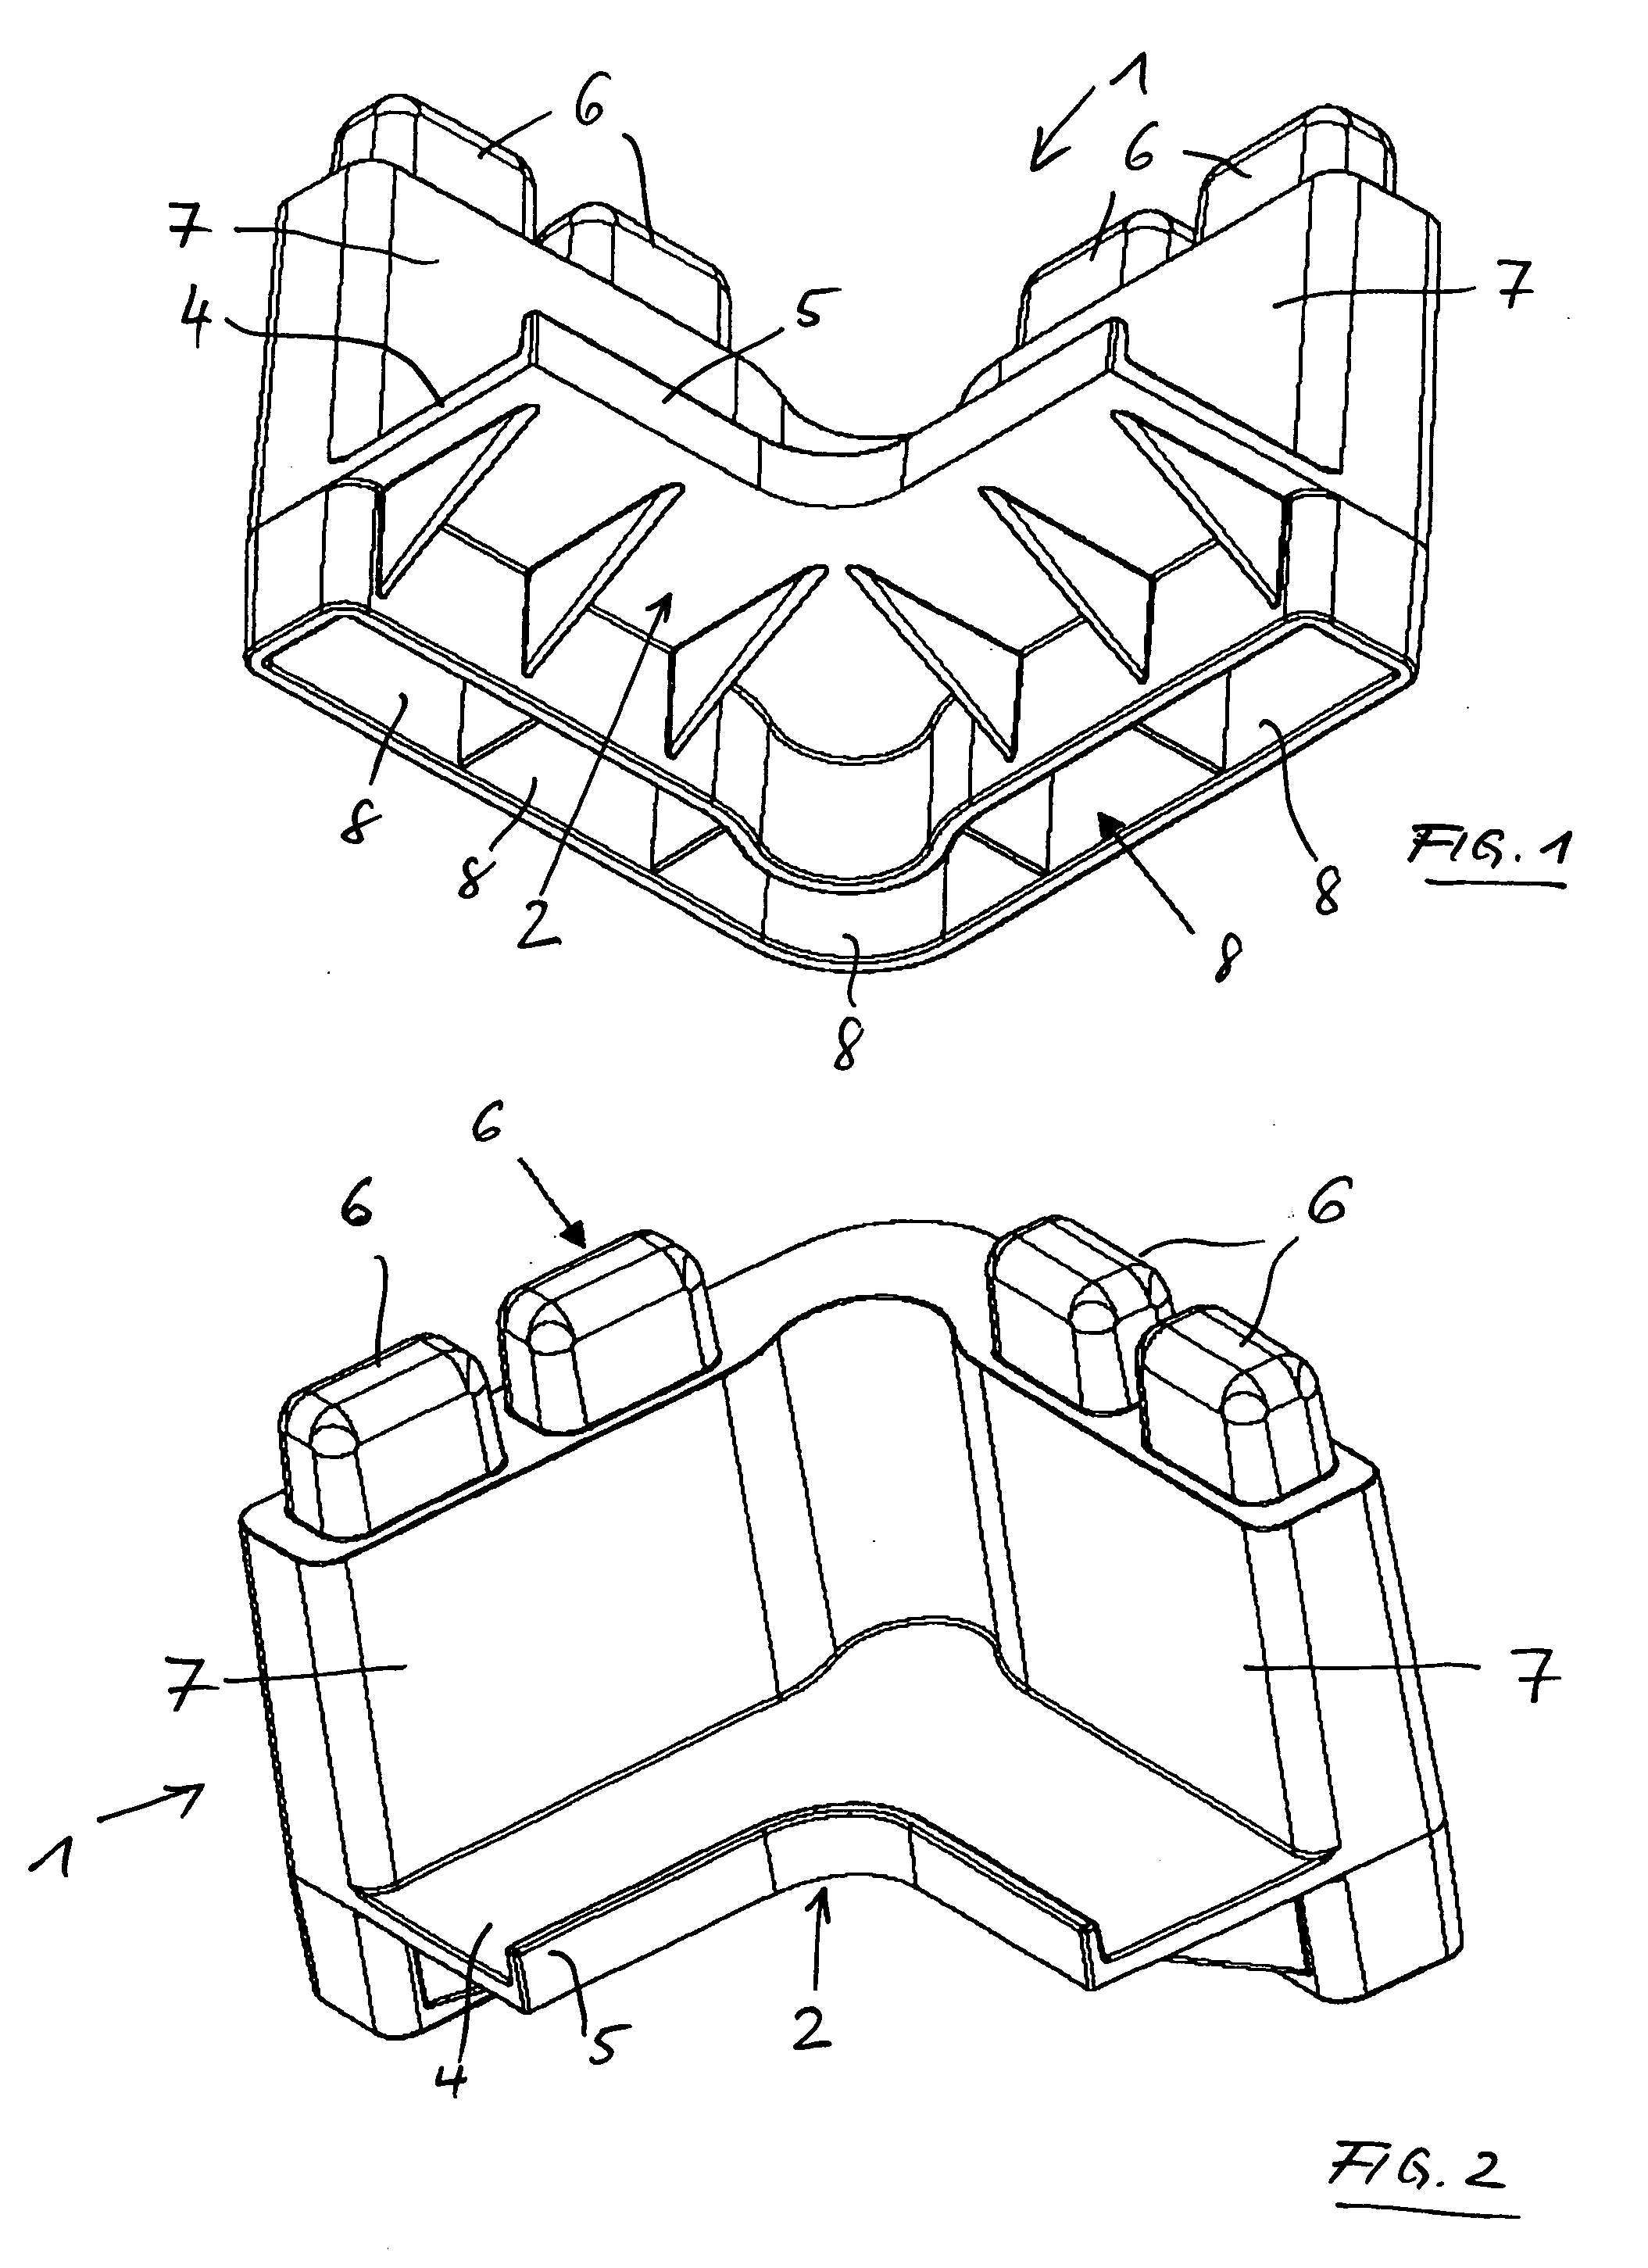 Modular plug-in apparatus and method for safe and secure storage of horizontally stacked photovoltaic modules during transport